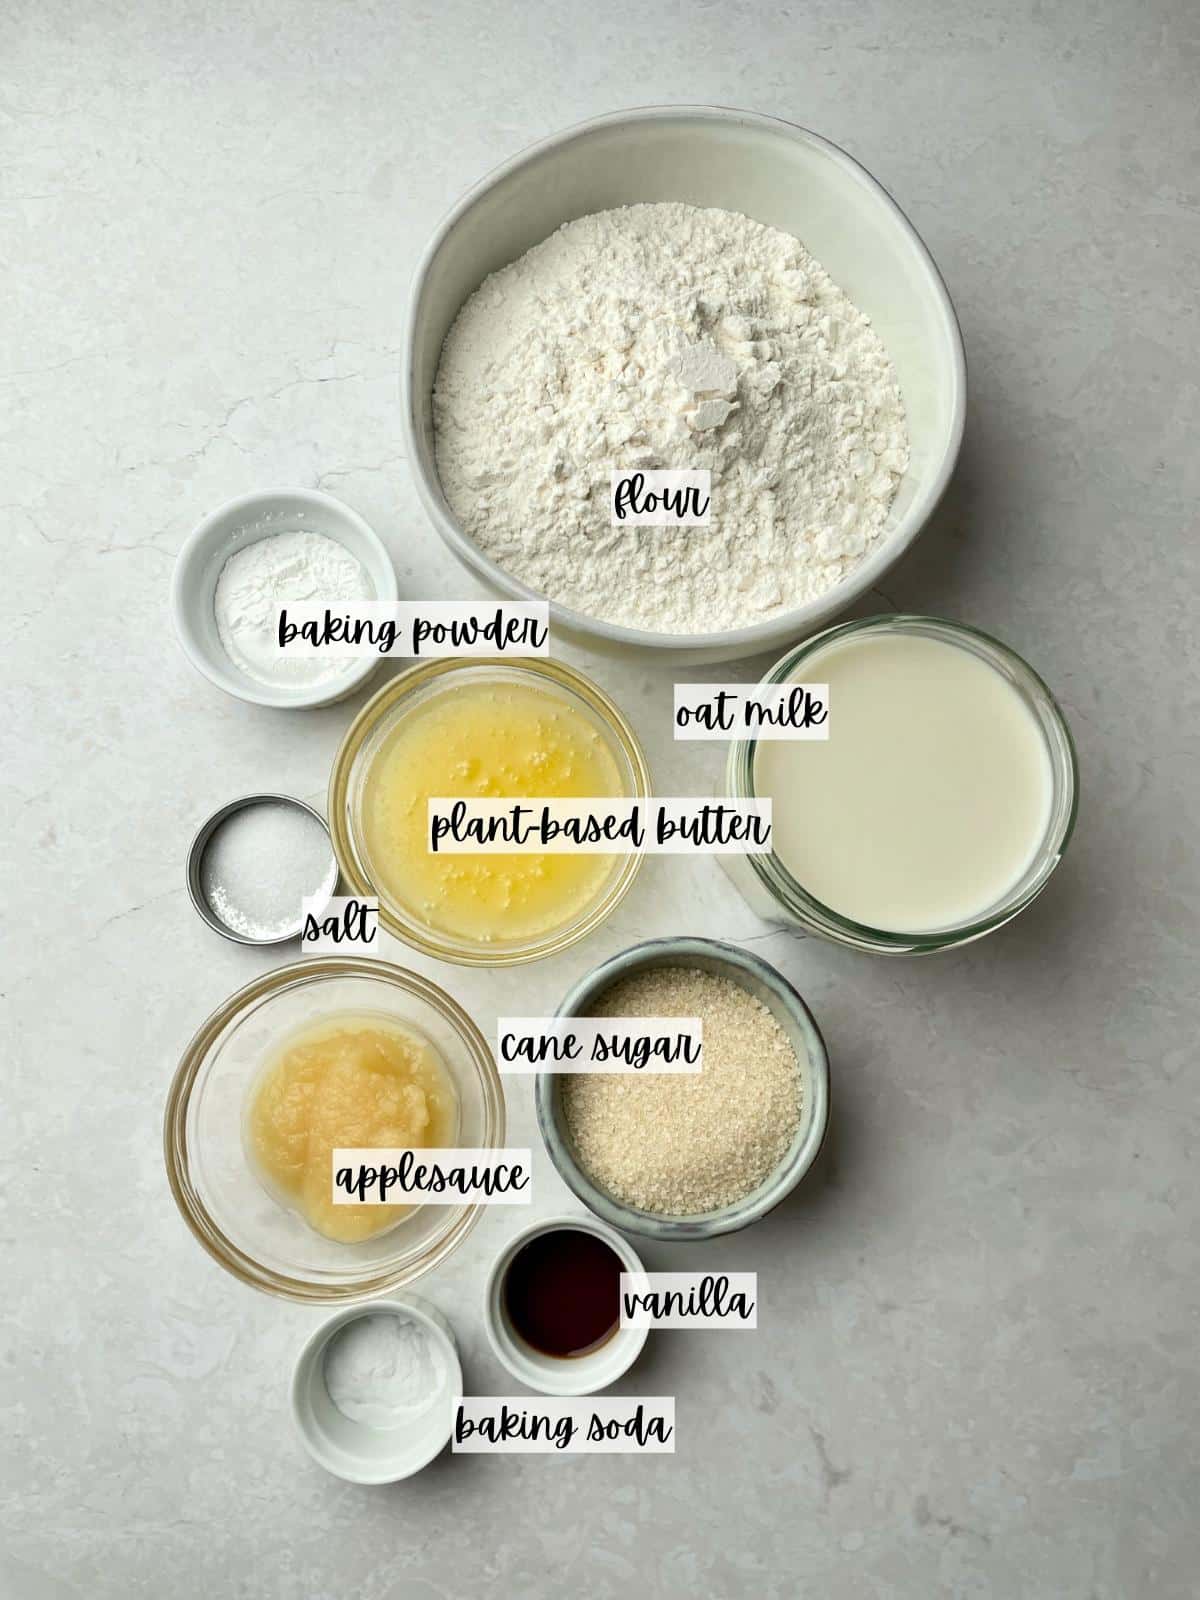 Labeled ingredients for oat milk pancakes.